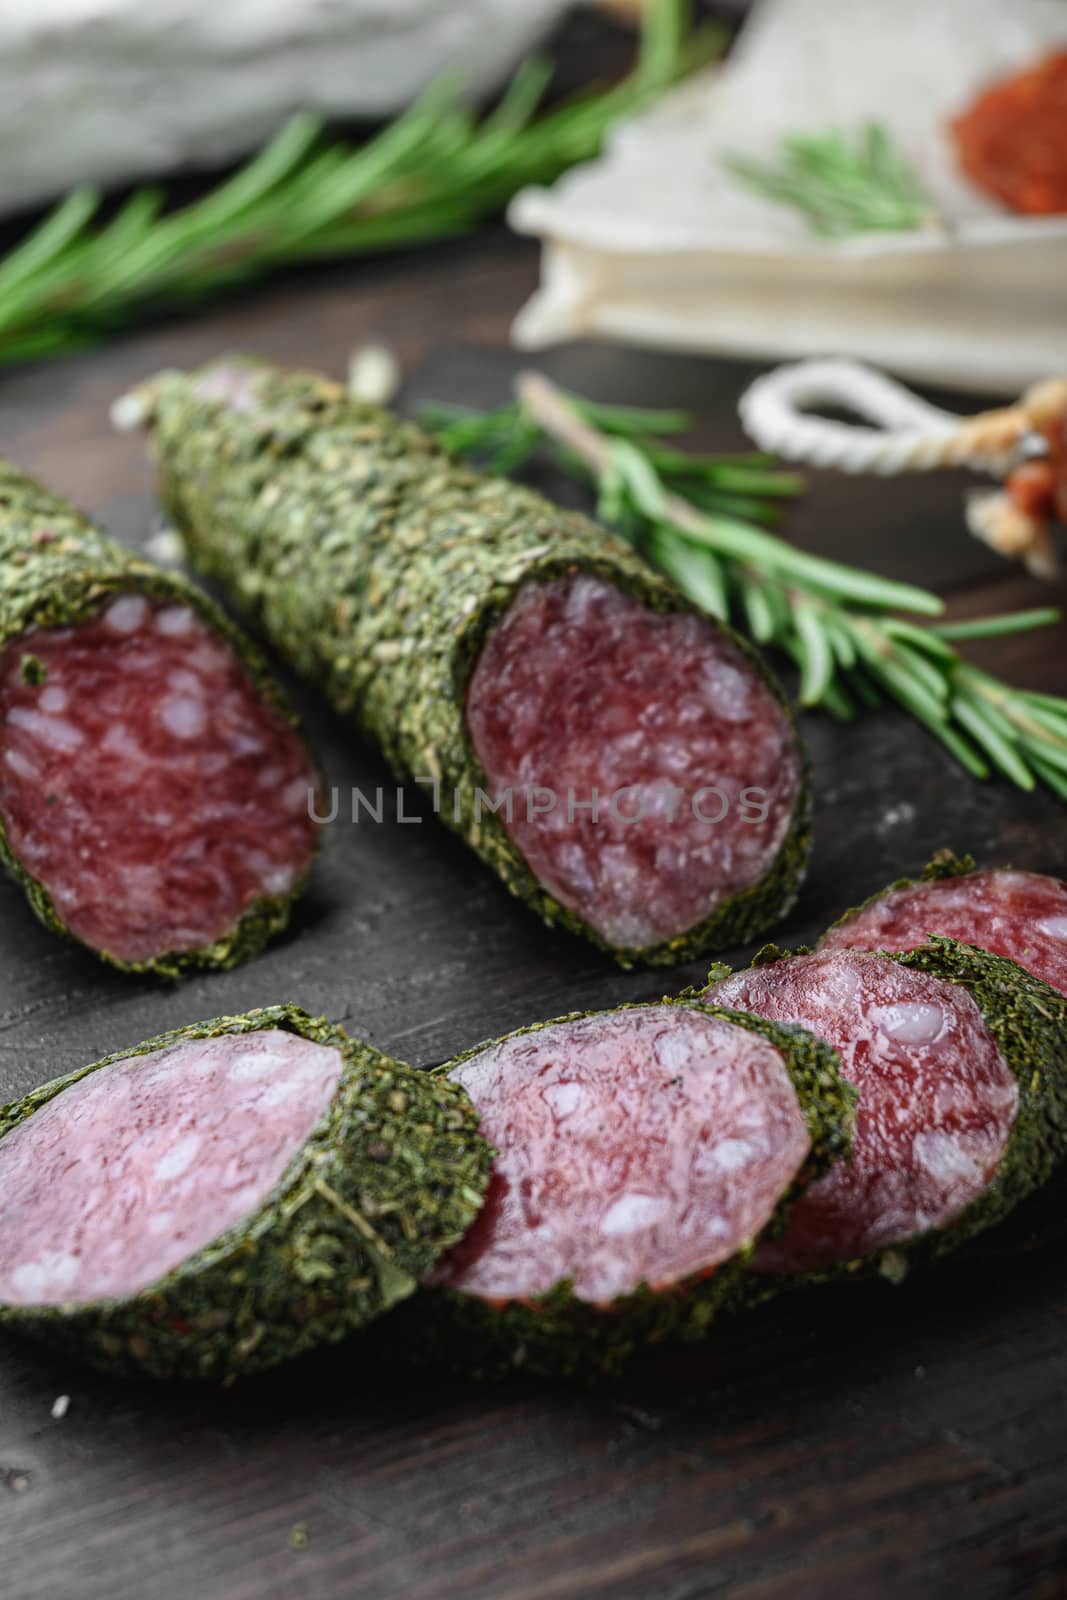 Variety of dry cured chorizo, fuet and other sausages cut in slices with herbs on dark wooden background.